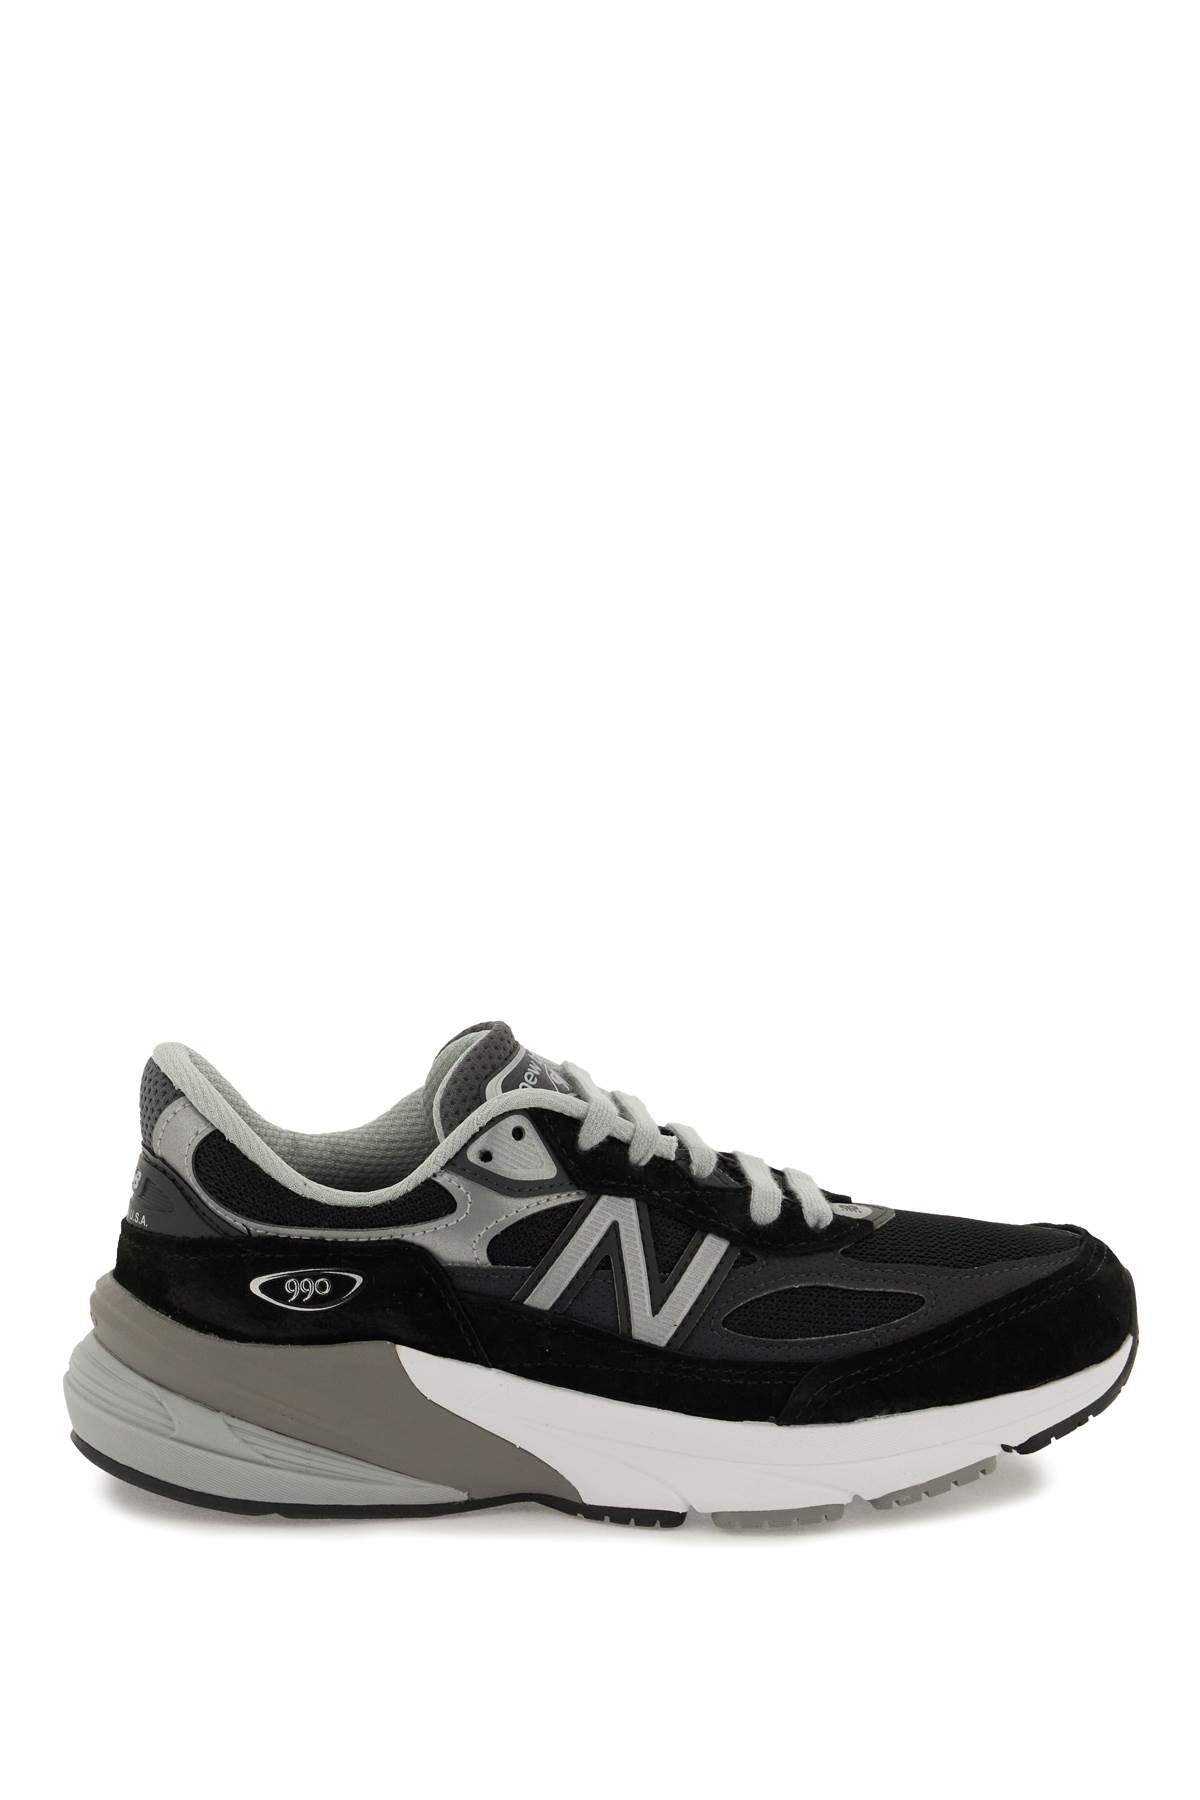 New balance made in usa 990v6 sneakers-0